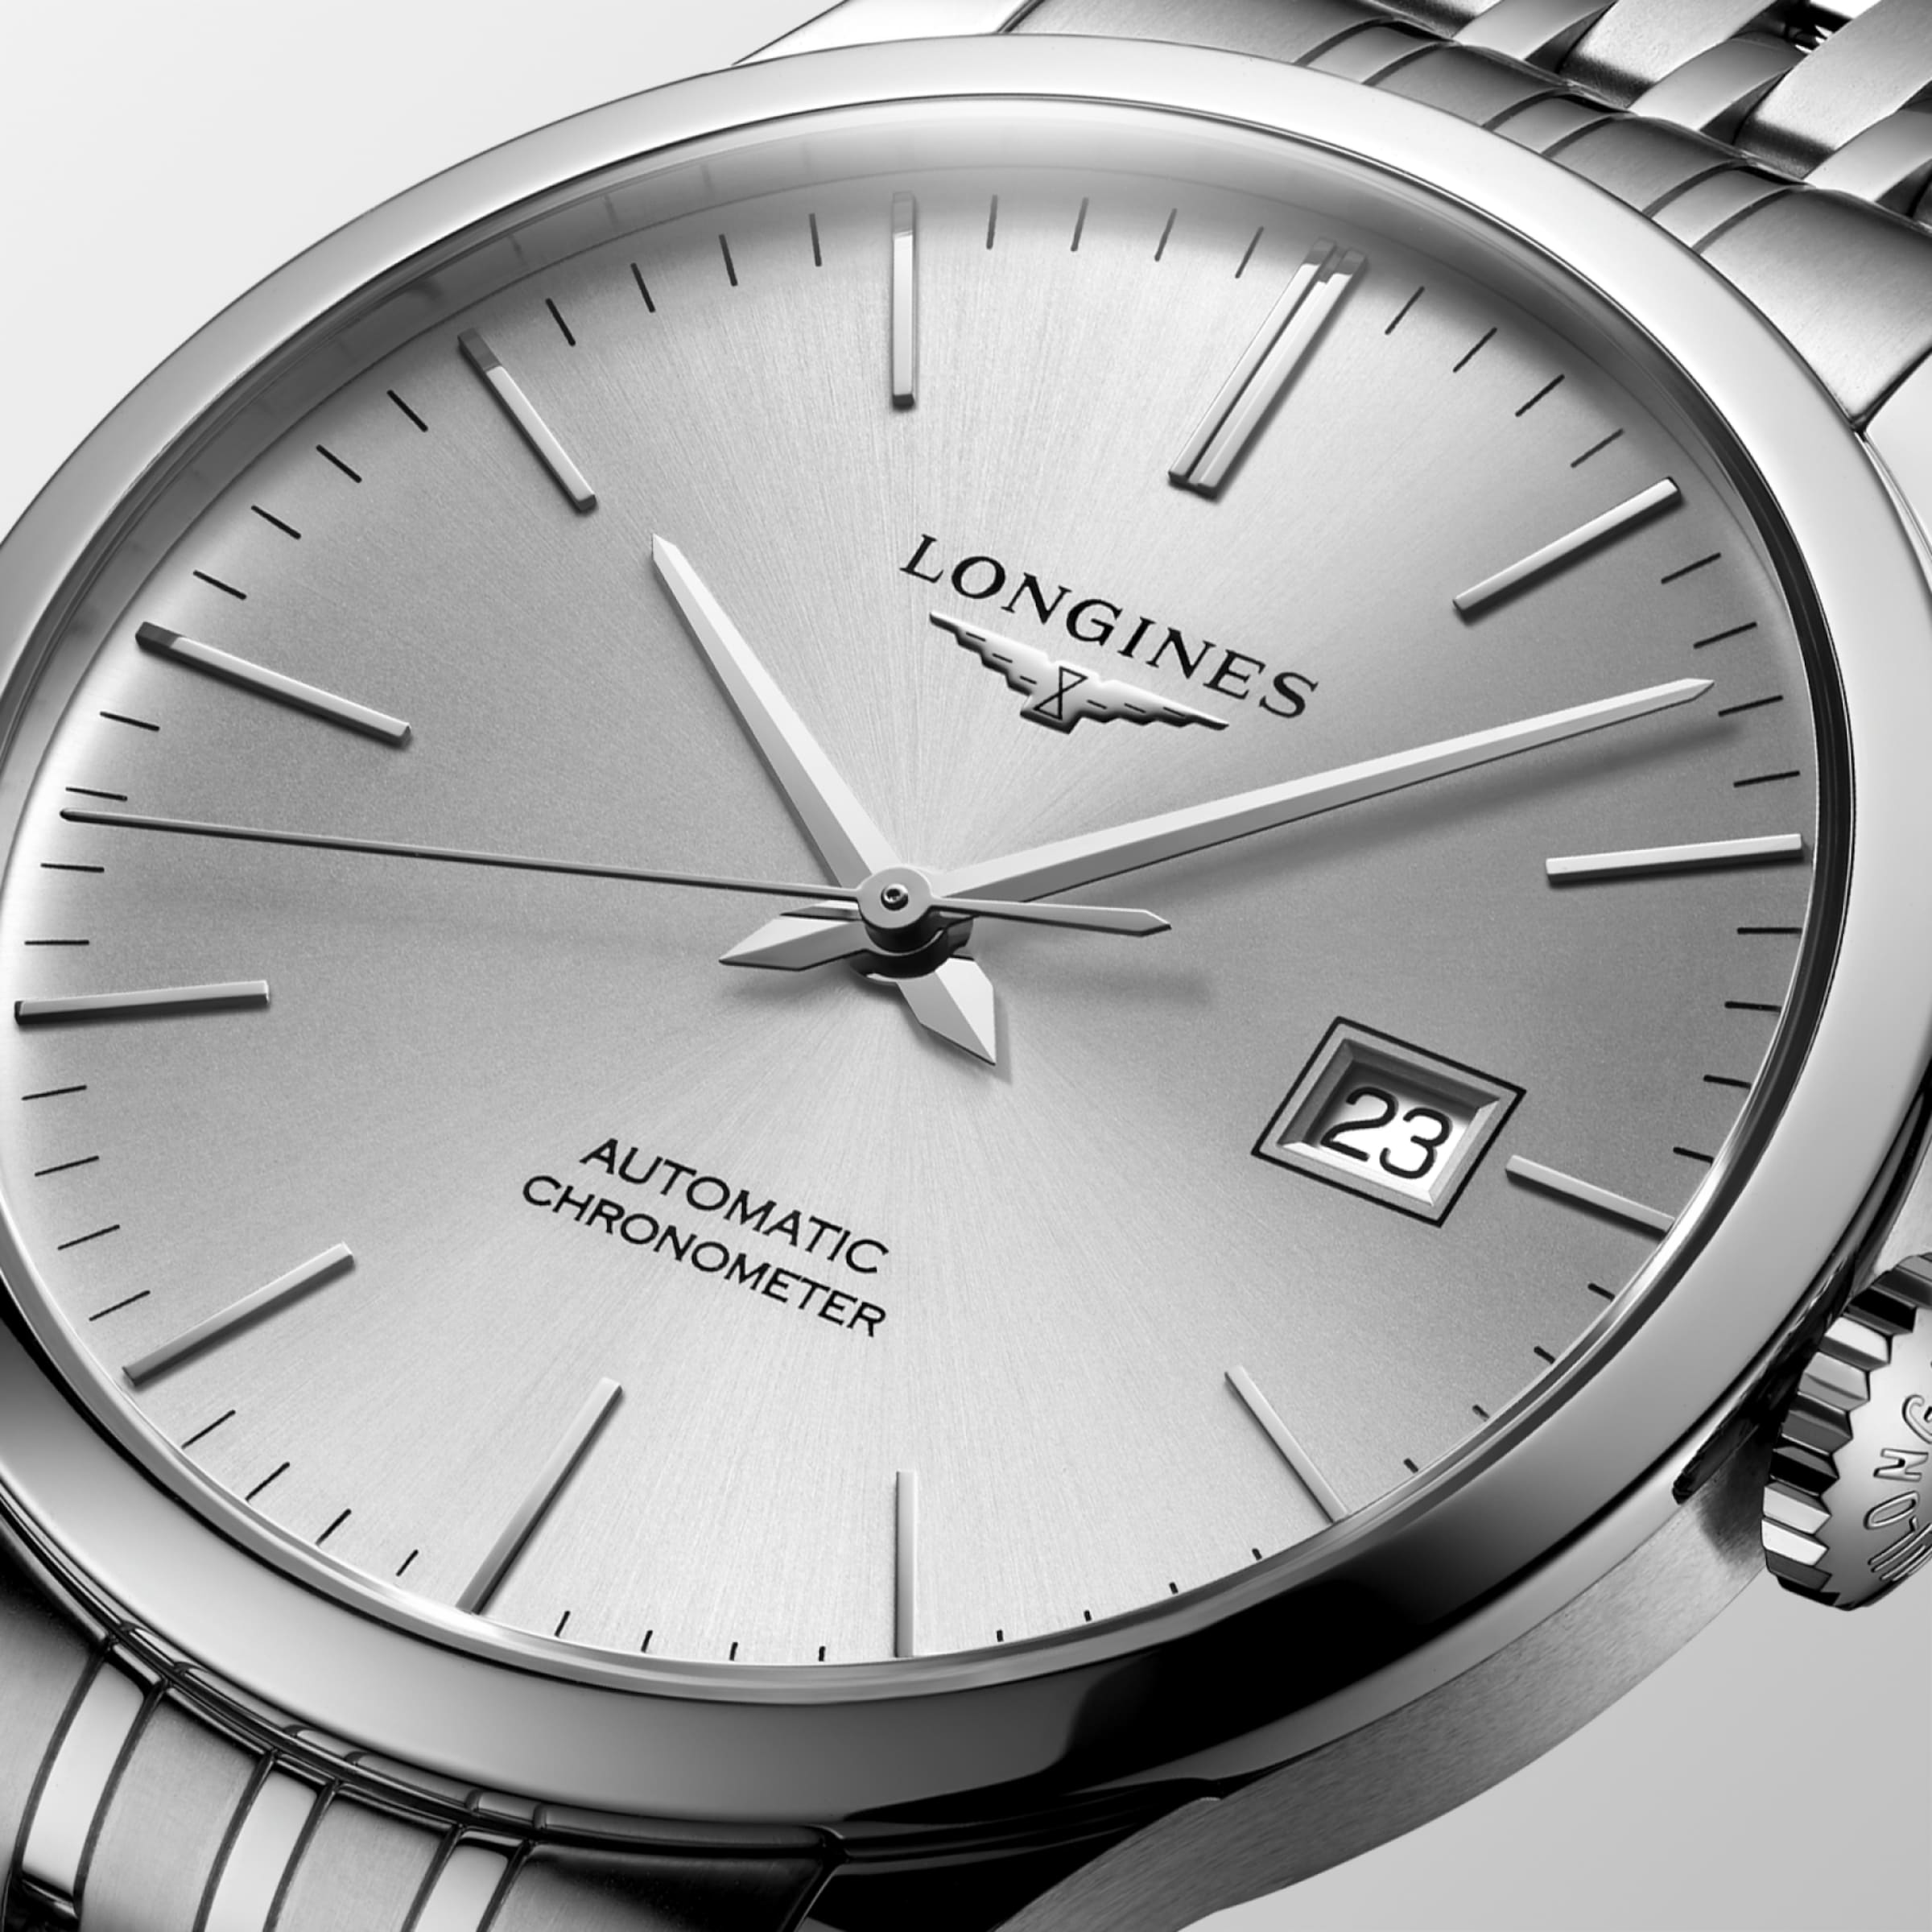 Longines RECORD Automatic Stainless steel Watch - L2.821.4.72.6